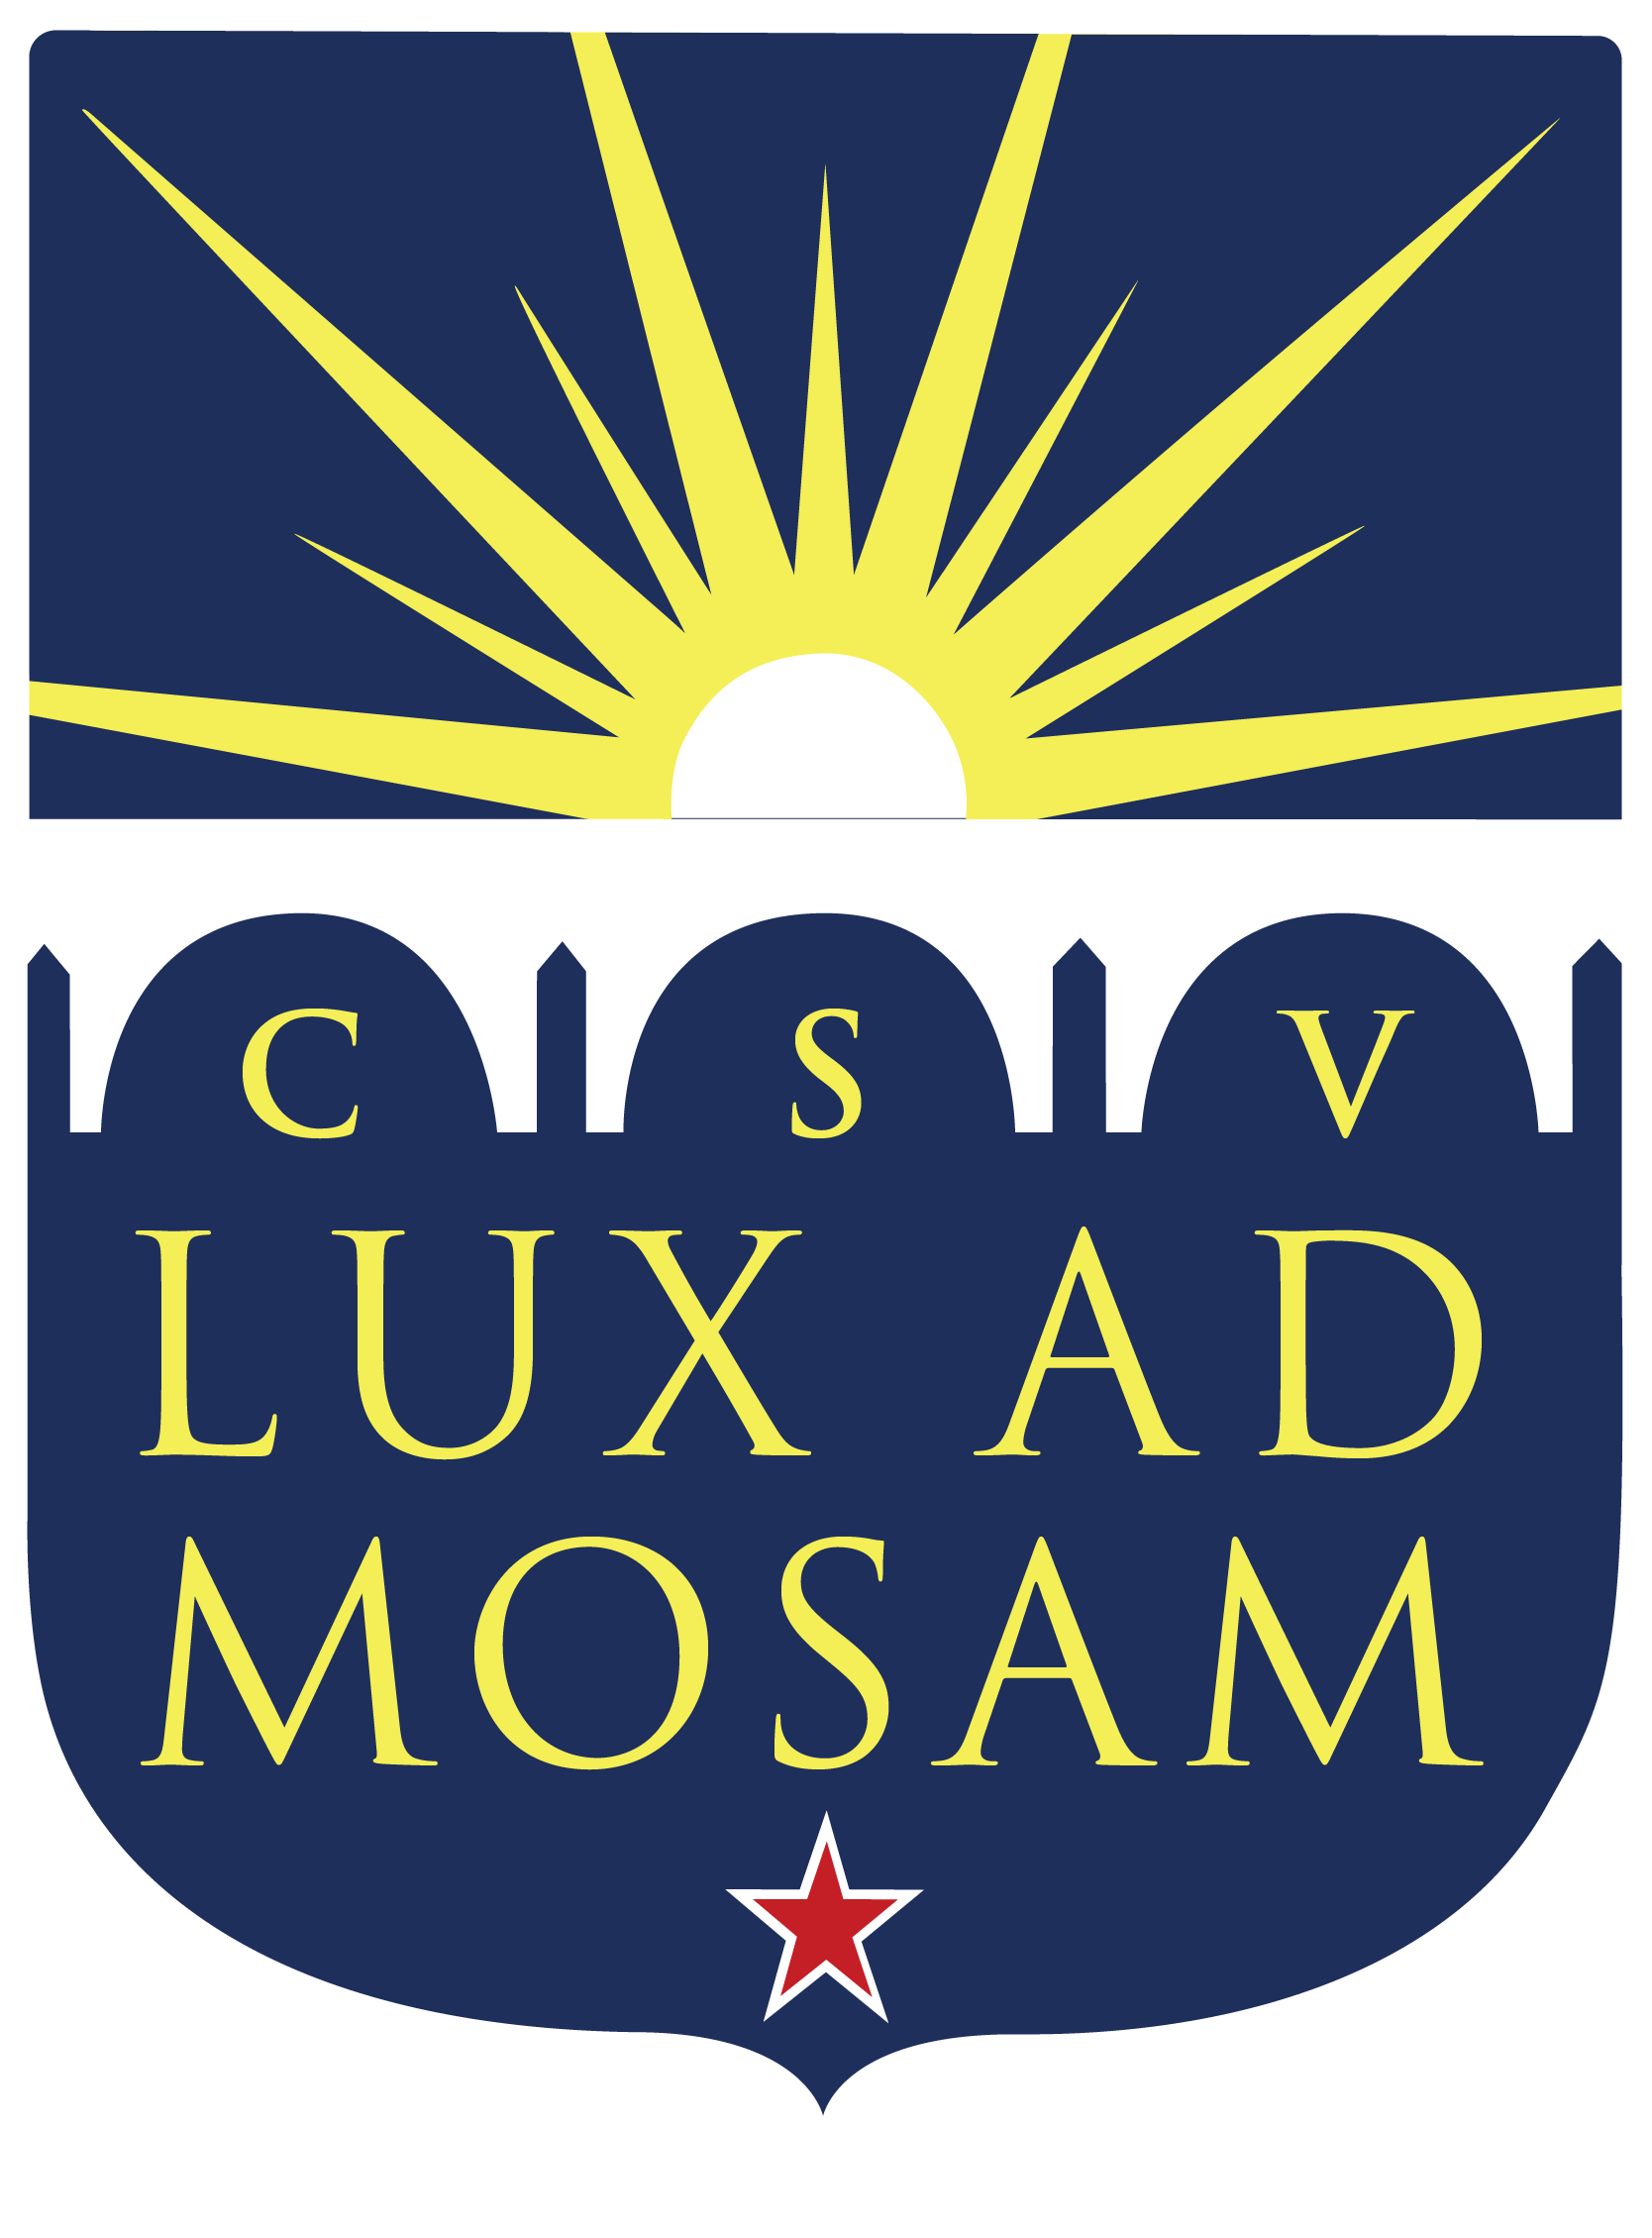 c.s.v. Lux ad Mosam